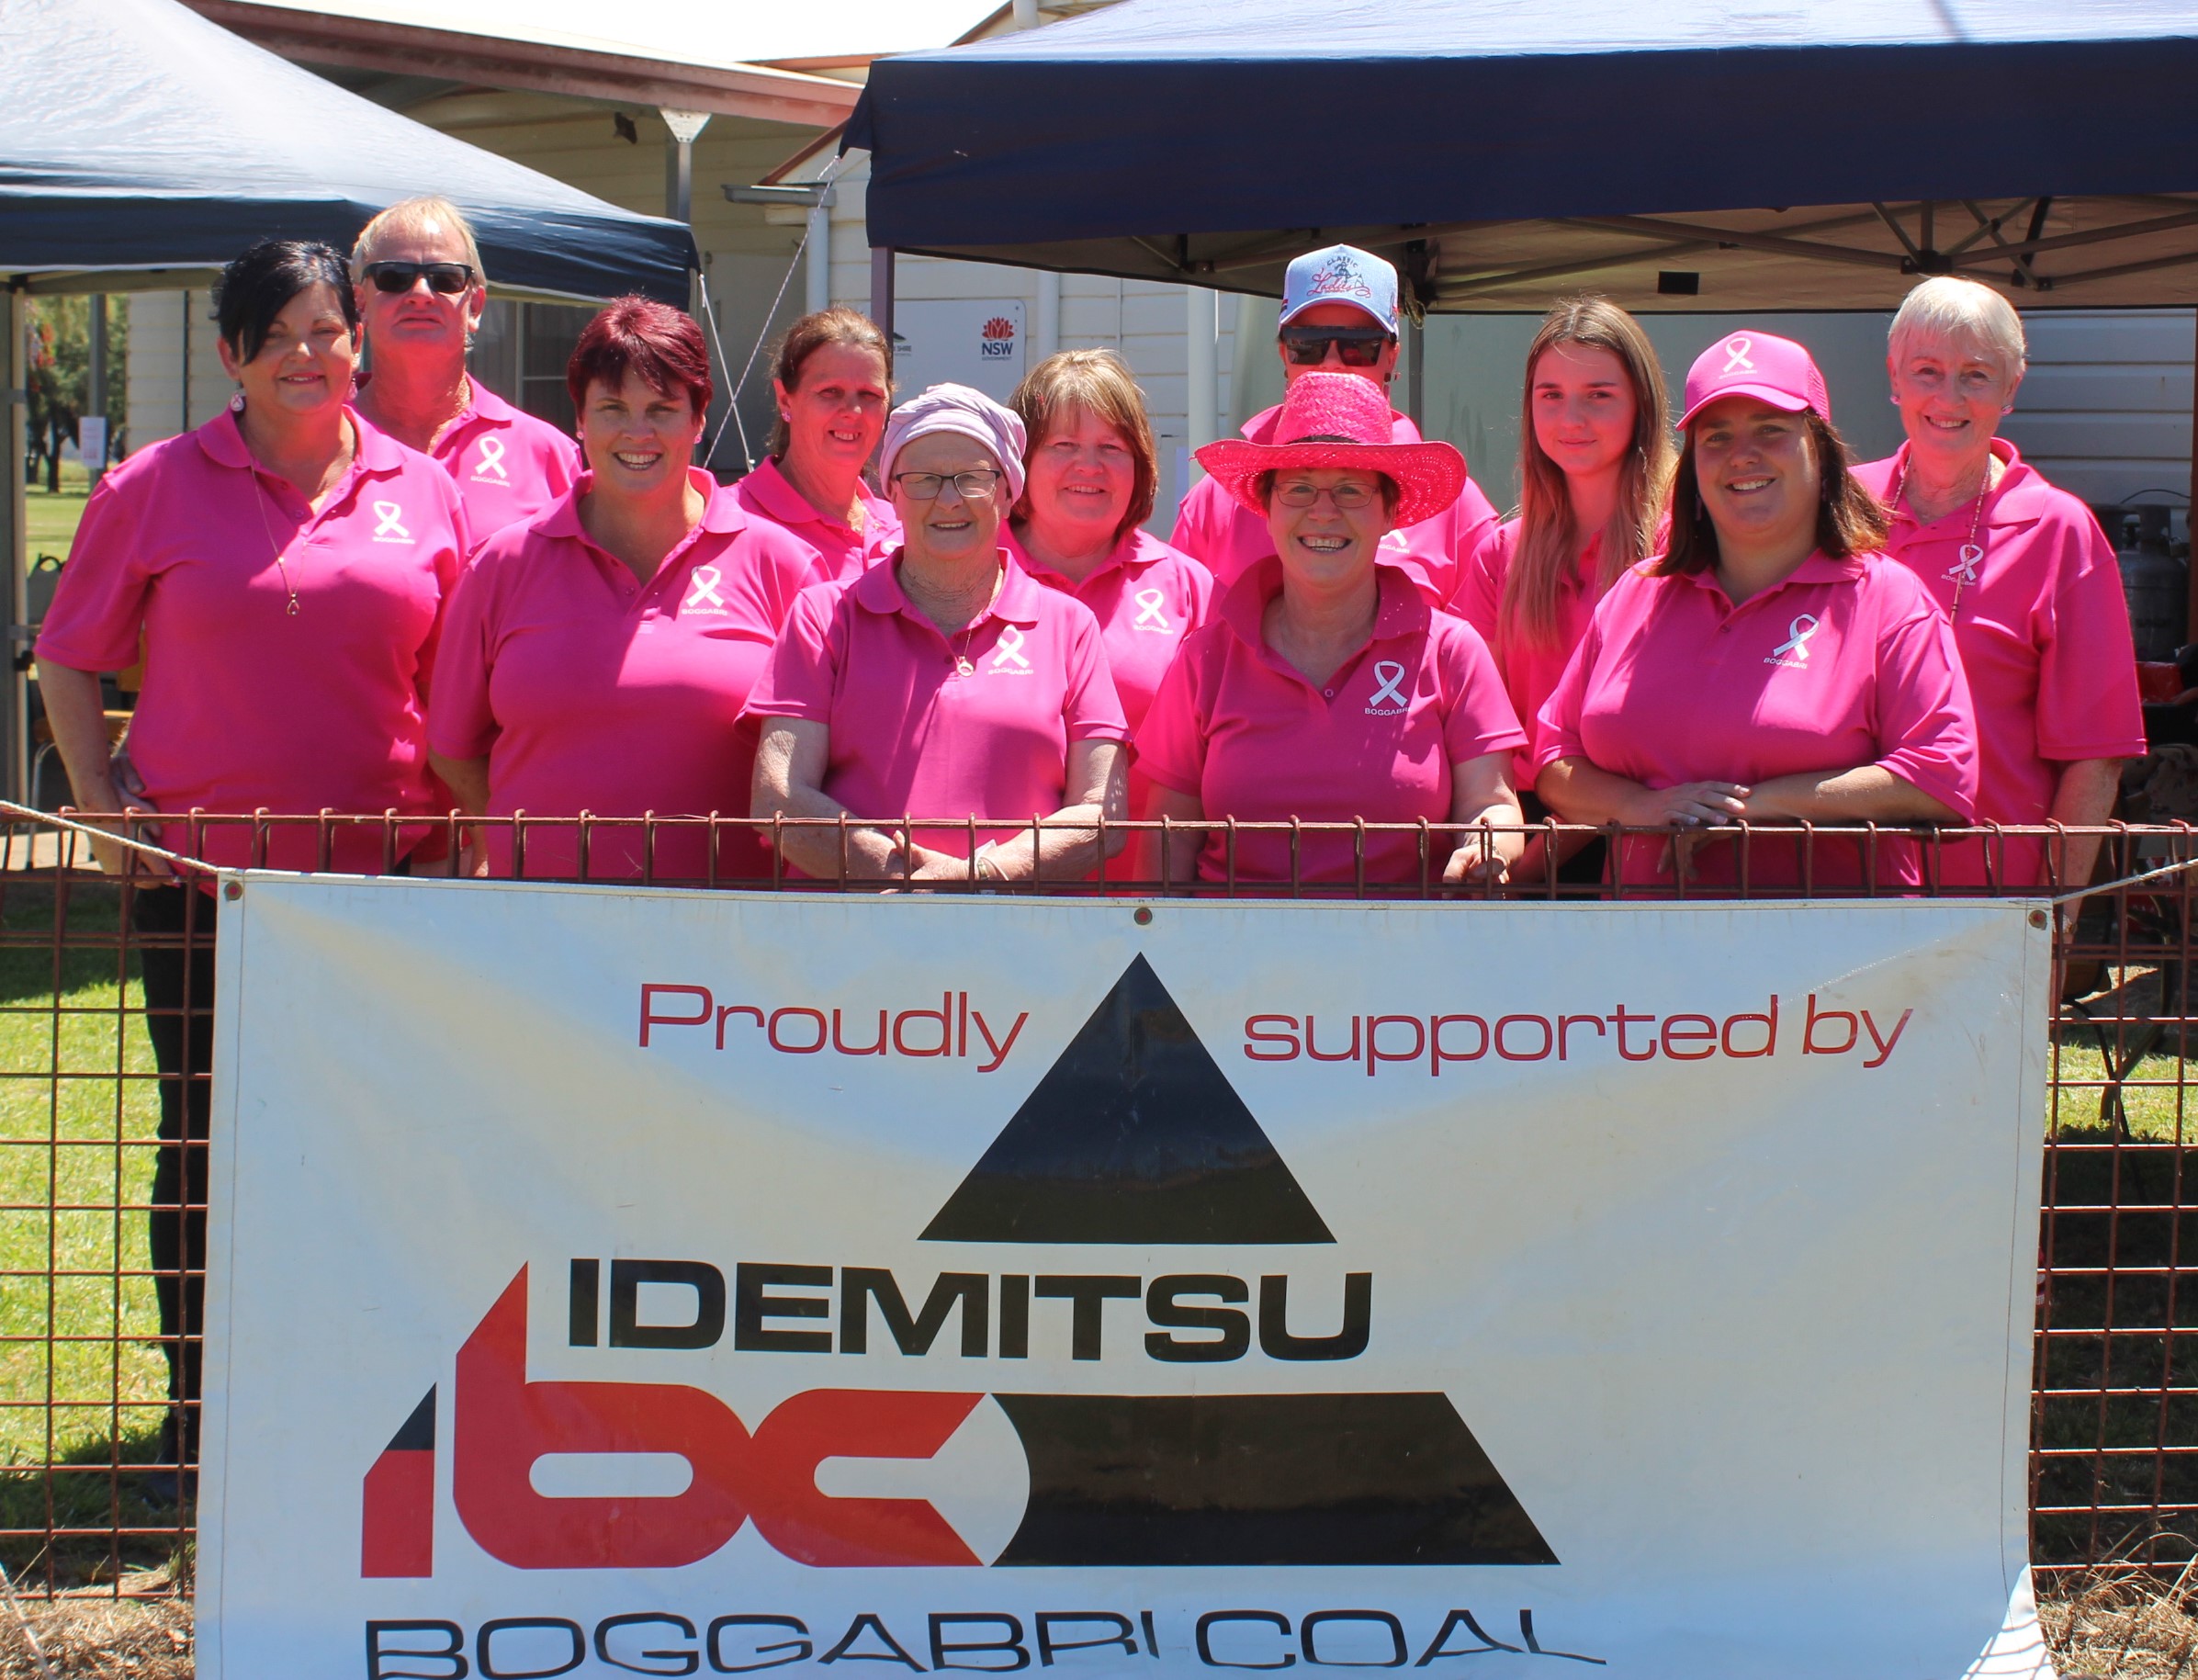 Organising committee: Back, Jeff Hobden, Joanne Tailby, Helen Martin, Paige Cassidy, Maddie House, Noreen Boehm, front, Maria Eggleton, Tracey Cassidy, Margaret Ryan, Robyn Traynor, Paula Neader with the sign after a $5000 donation from Boggabri Coal.